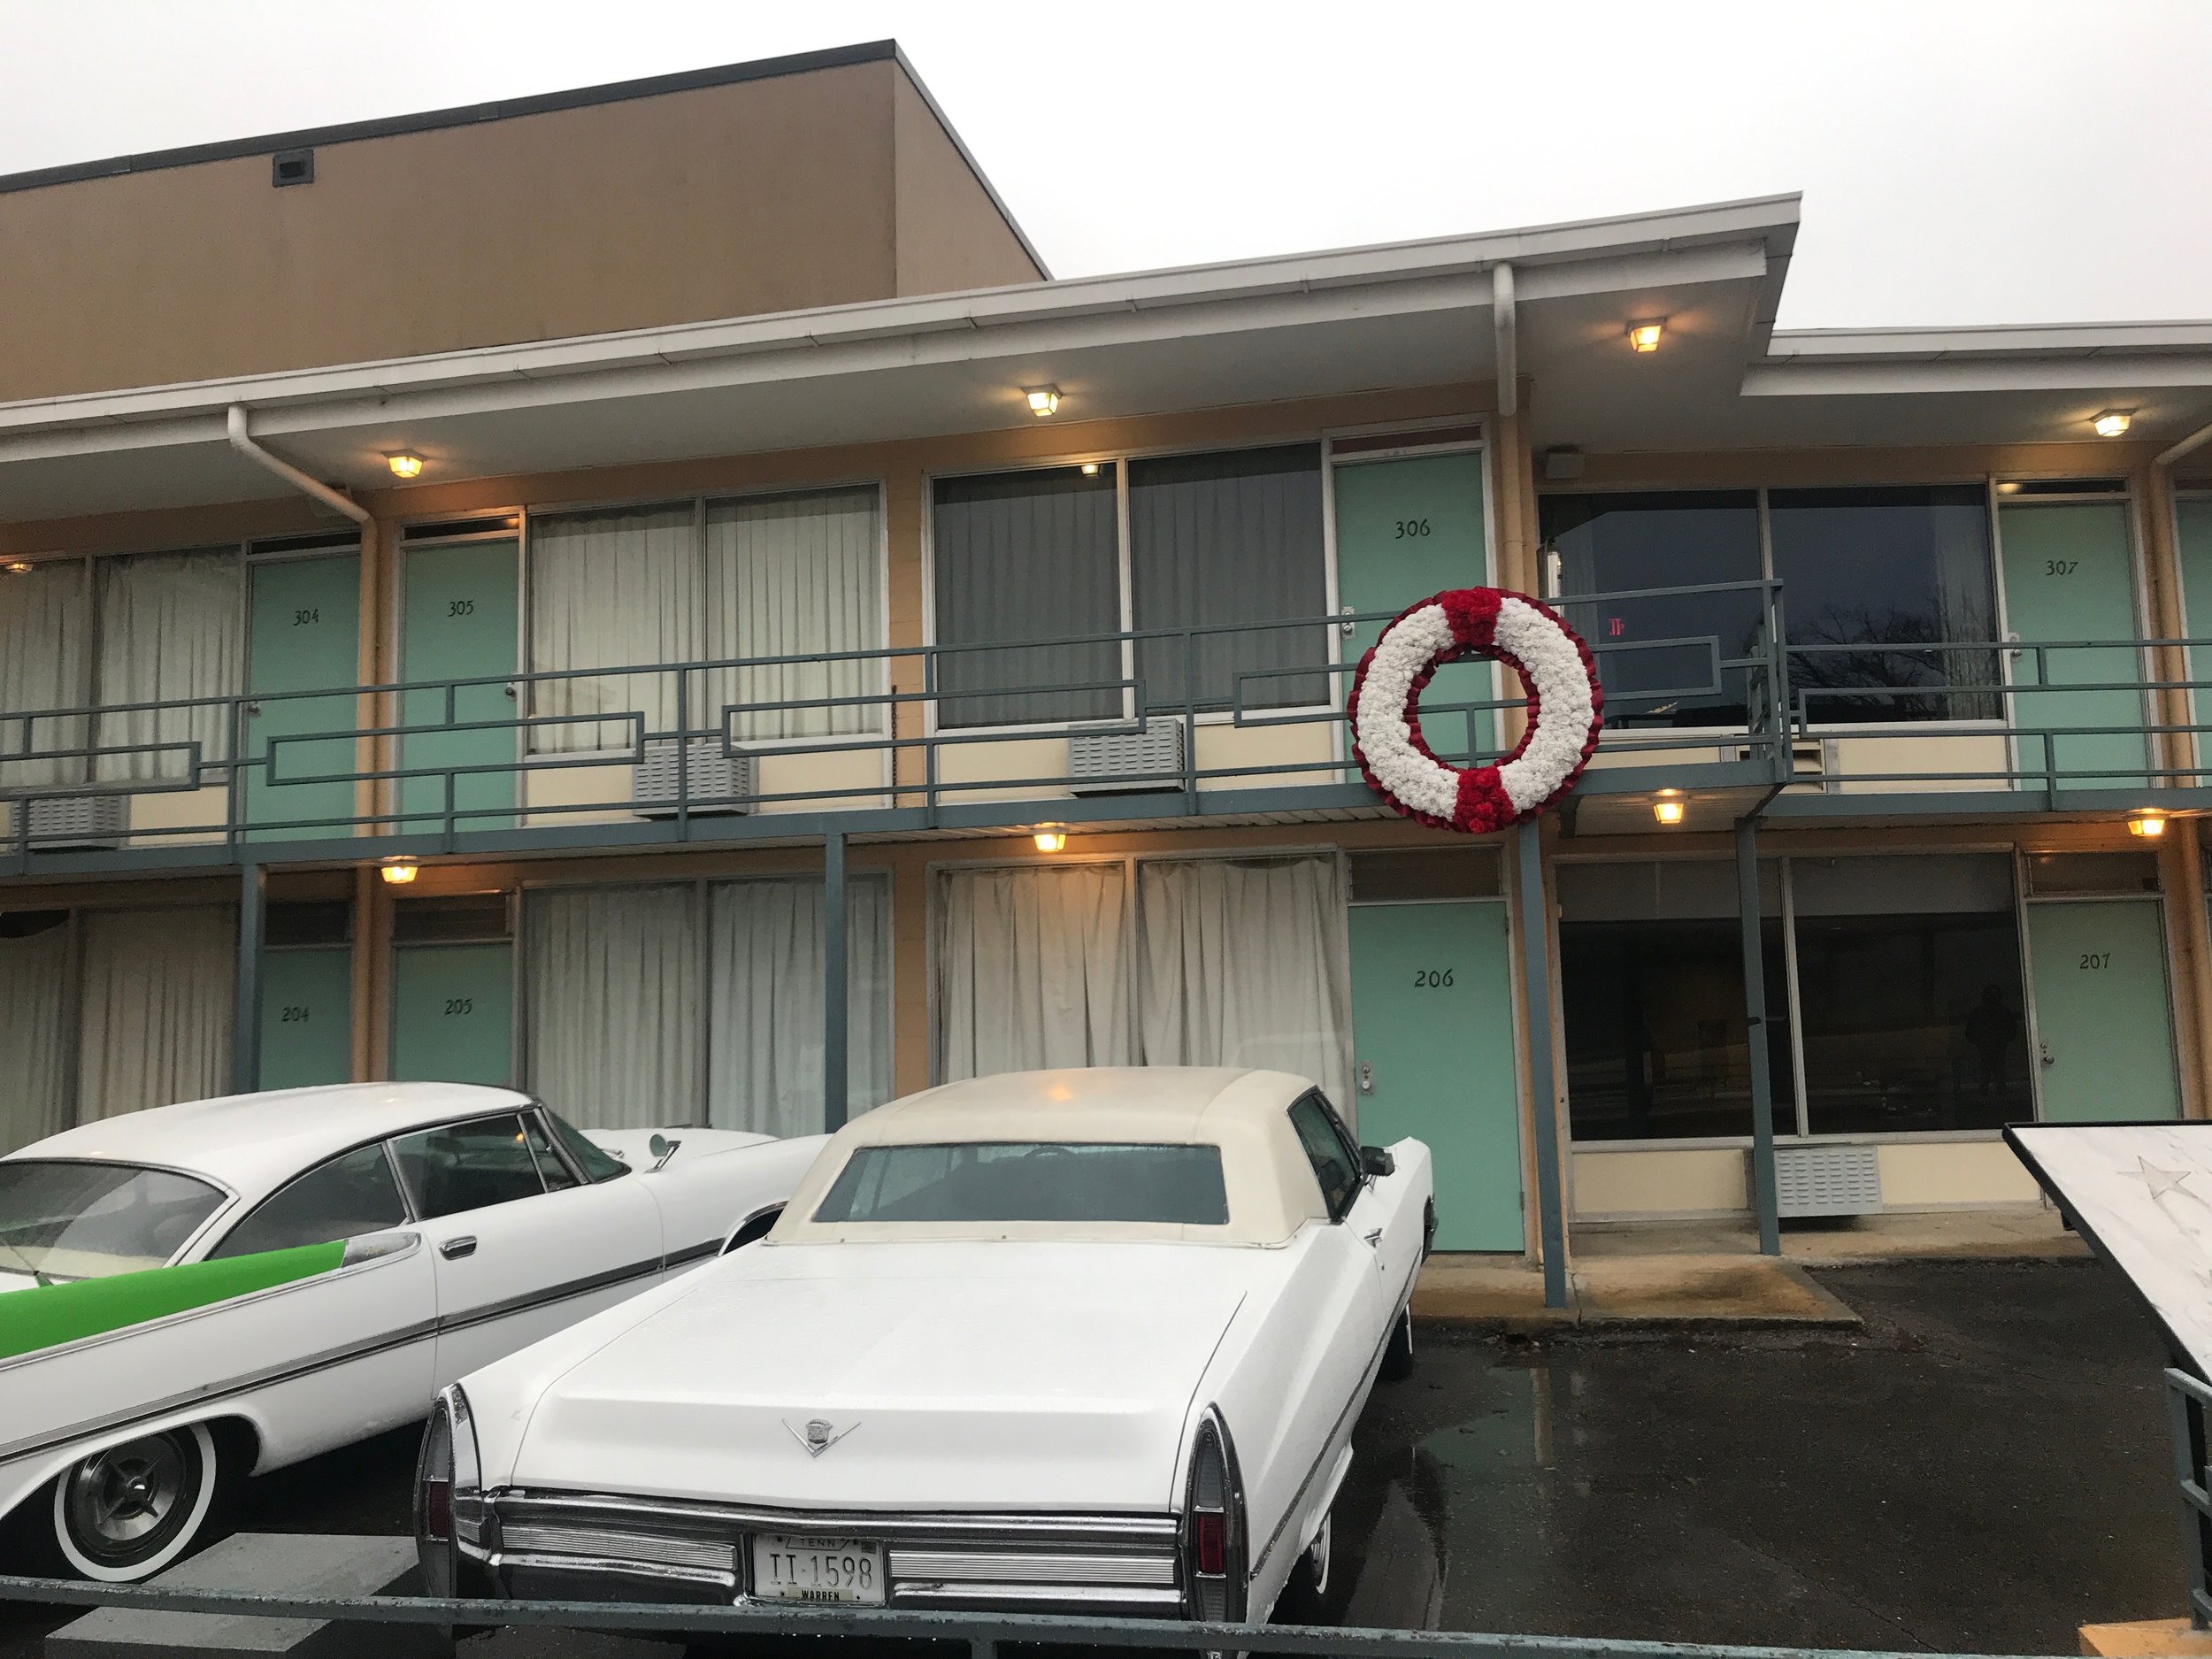  The Lorraine Motel in Memphis, site of the assassination of Dr. Martin Luther King Jr., is now part of the National Civil Rights Museum.      